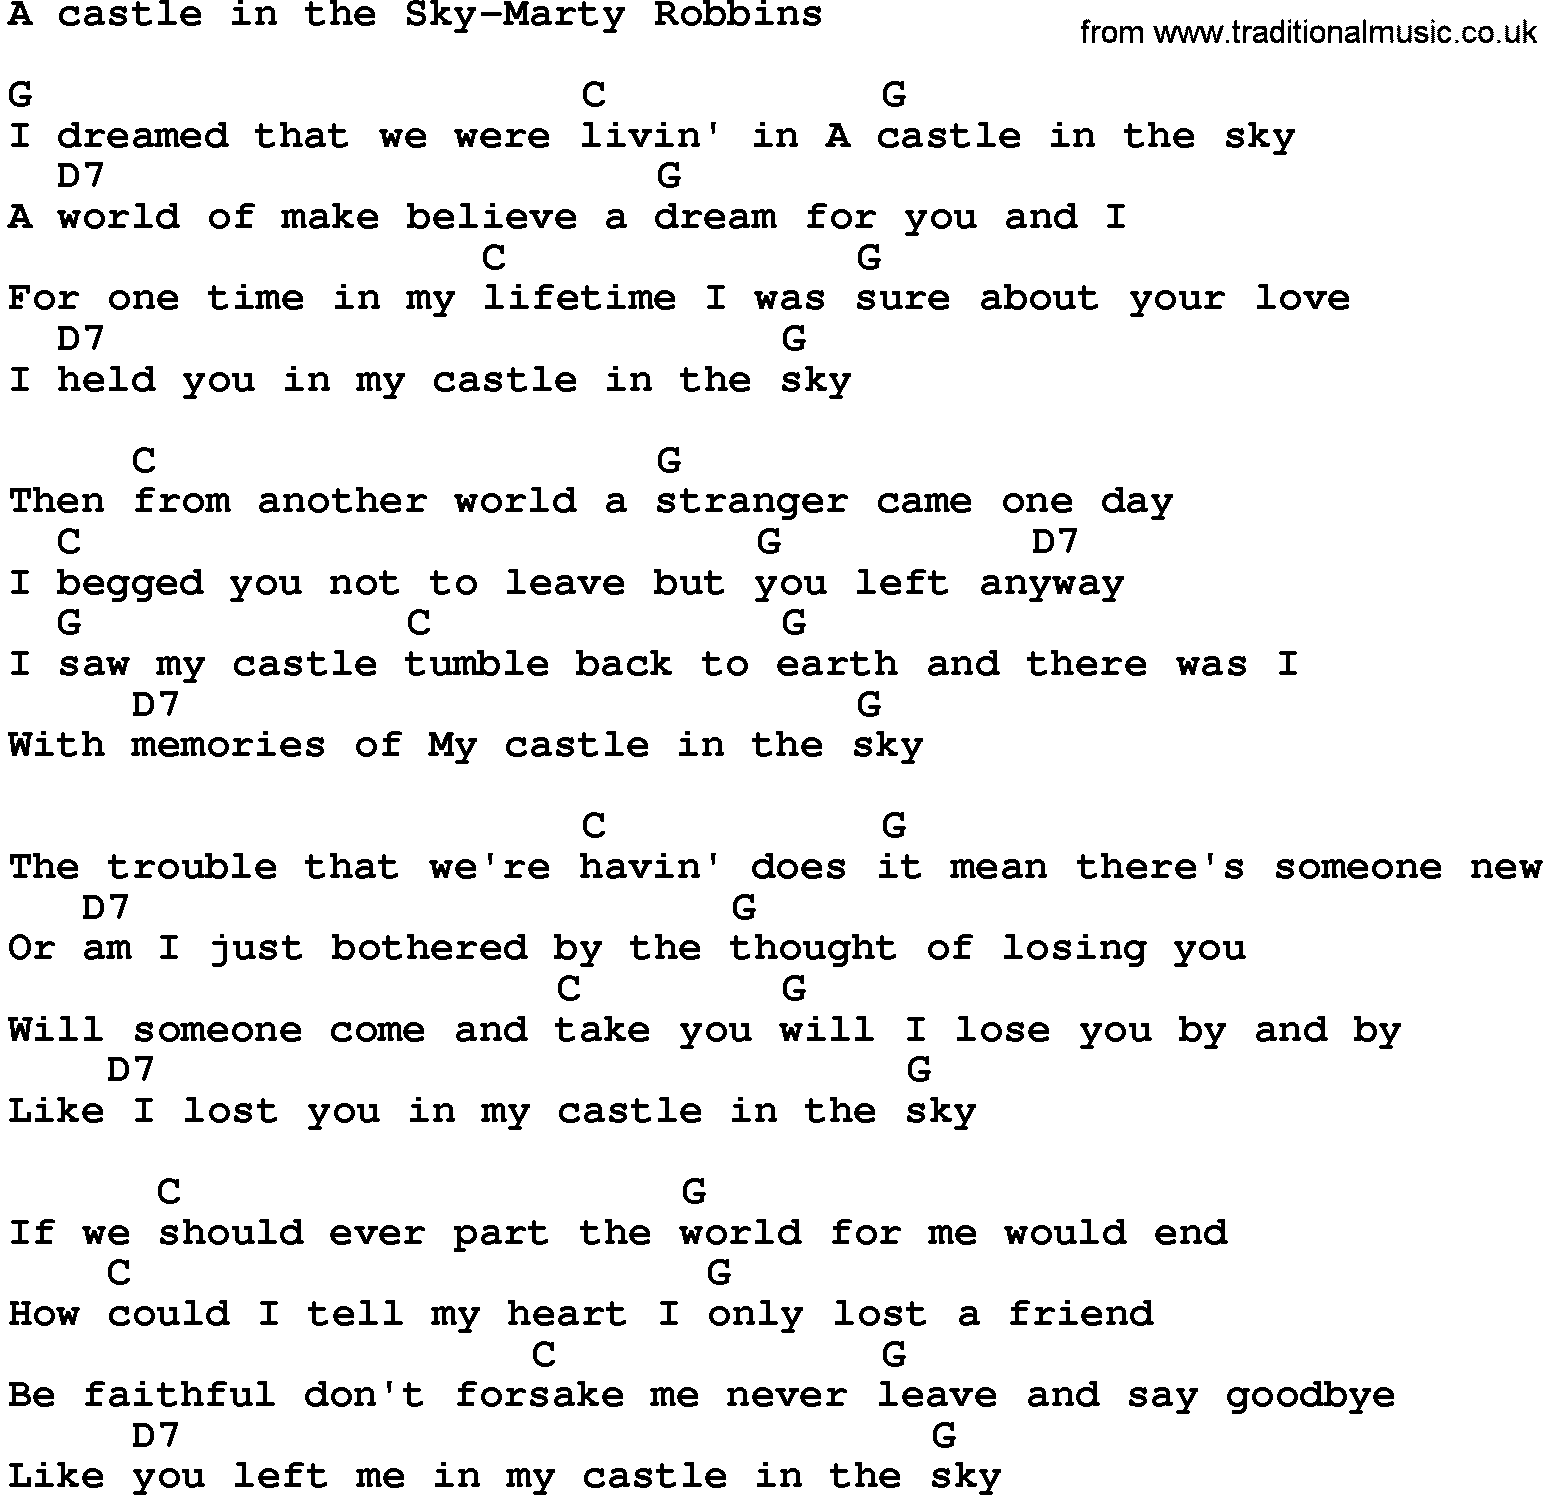 Country music song: A Castle In The Sky-Marty Robbins lyrics and chords